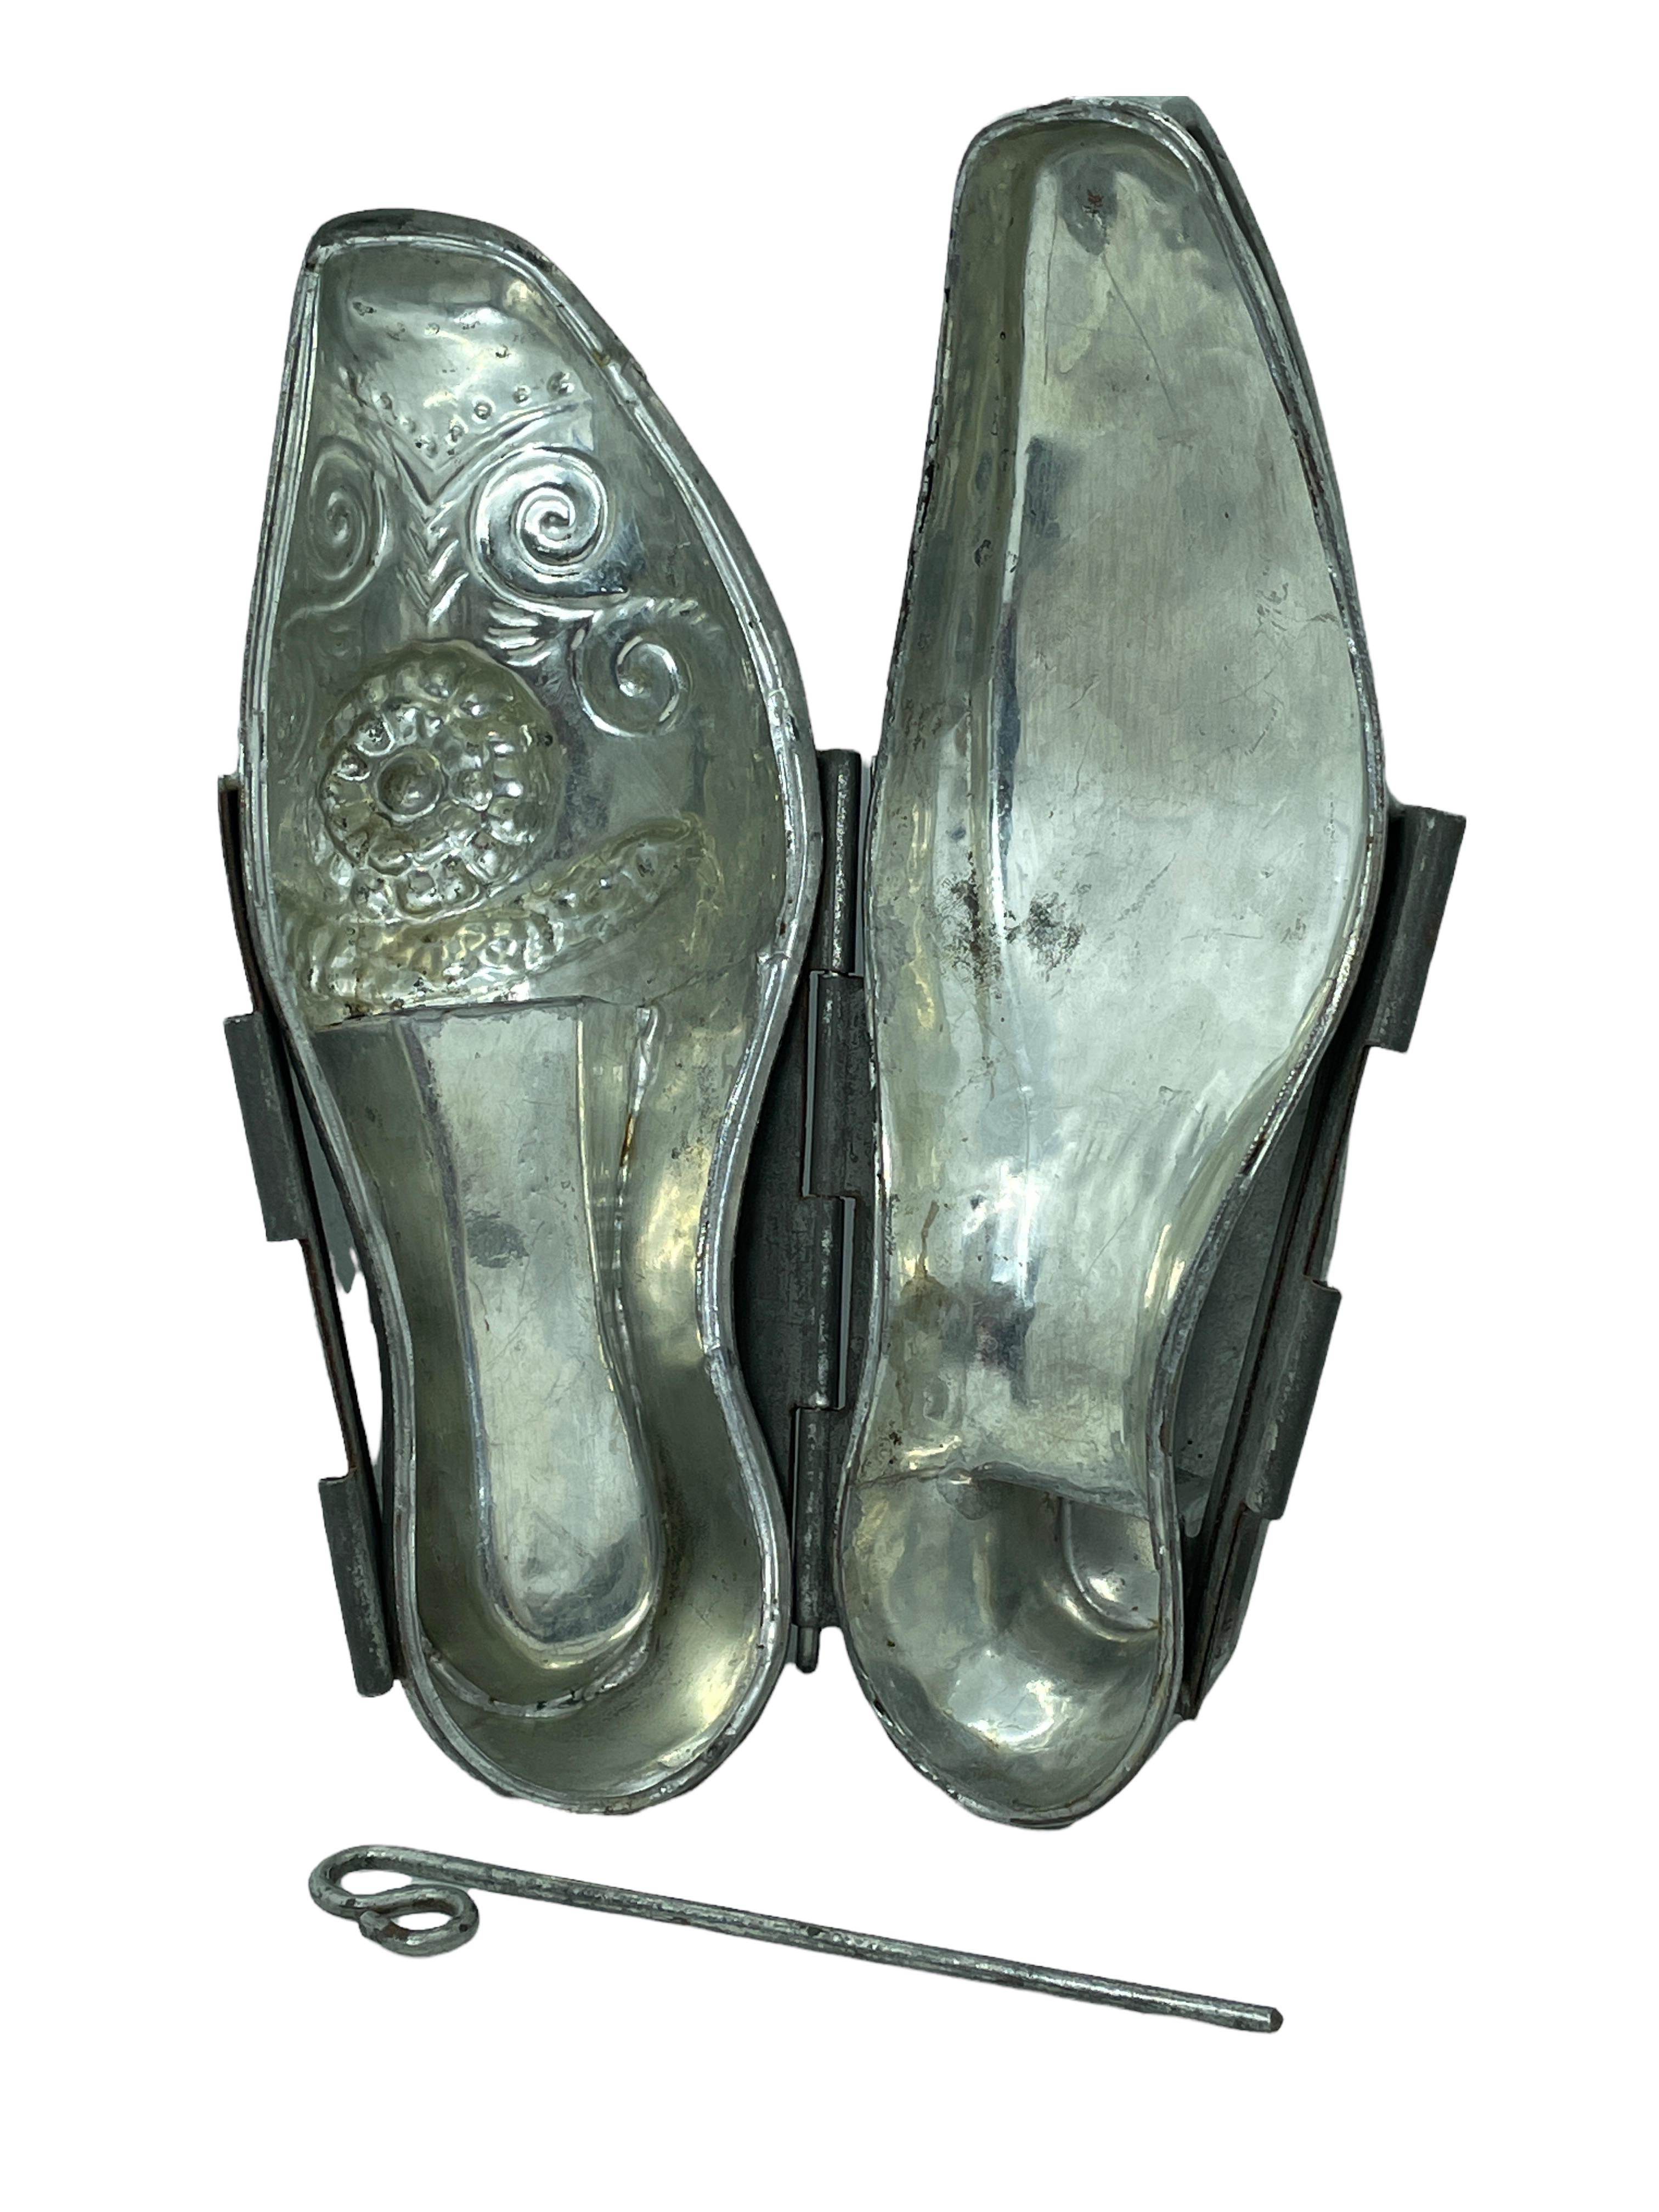 Beautiful Lady Shoe Chocolate or Baking Mold Antique German, 1890s For Sale 1